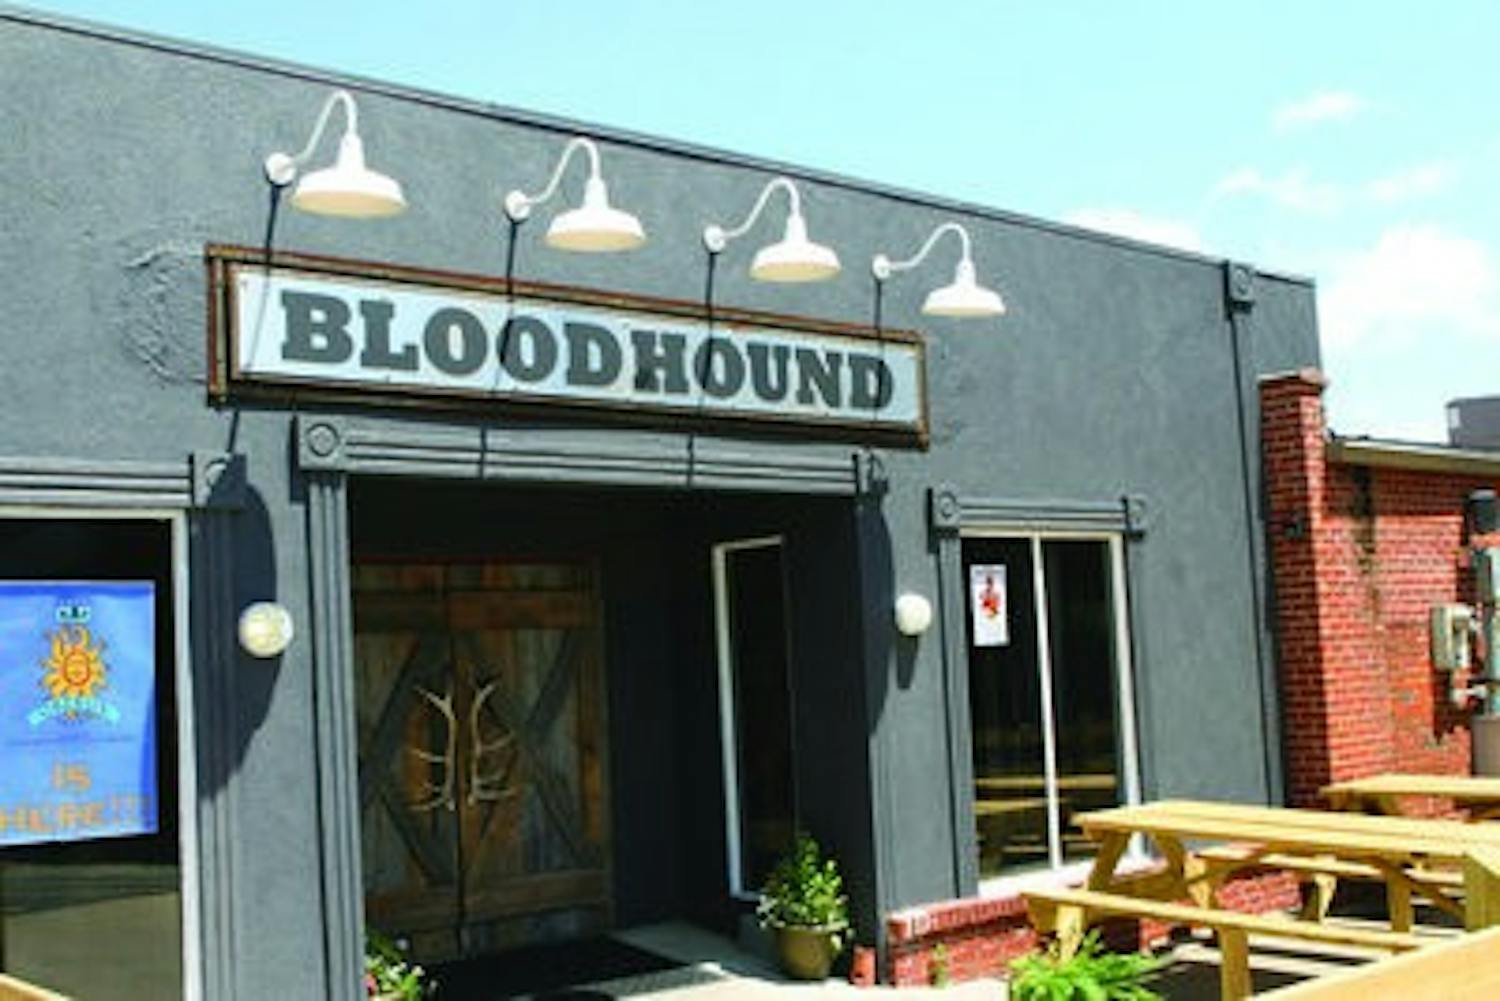 The entrance to Bloodhound Bar & Restaurant enhances the Southern atmosphere also found inside. (Rebecca Croomes / PHOTO EDITOR)